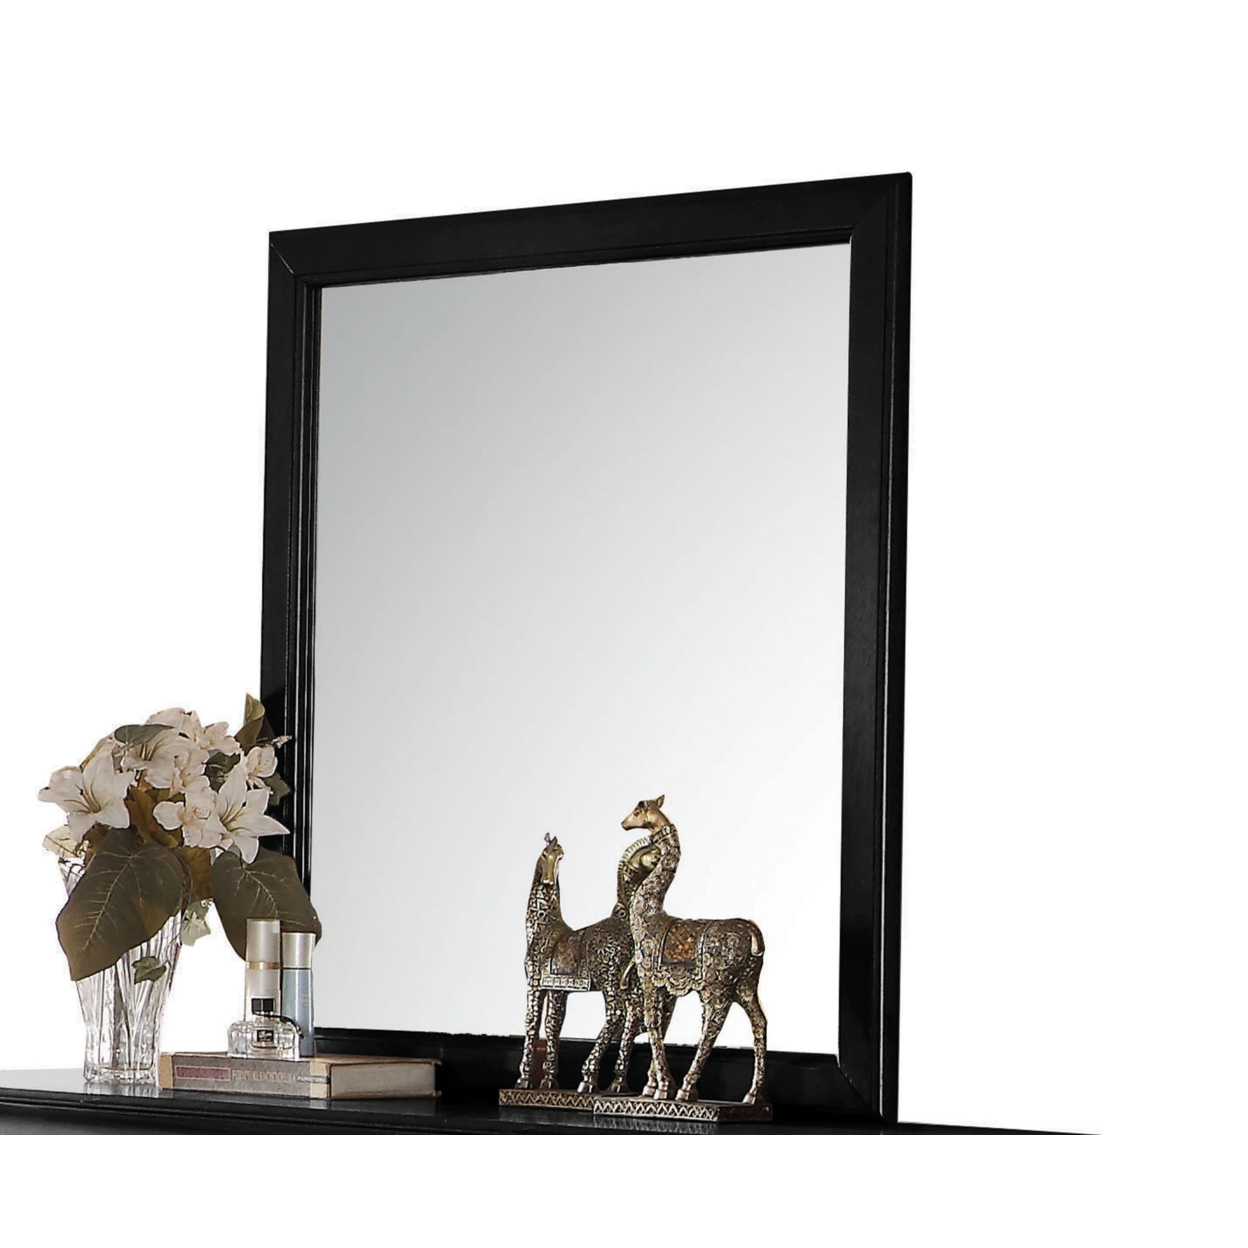 Transitional Style Mirror With Raised Wooden Frame, Black And Silver- Saltoro Sherpi